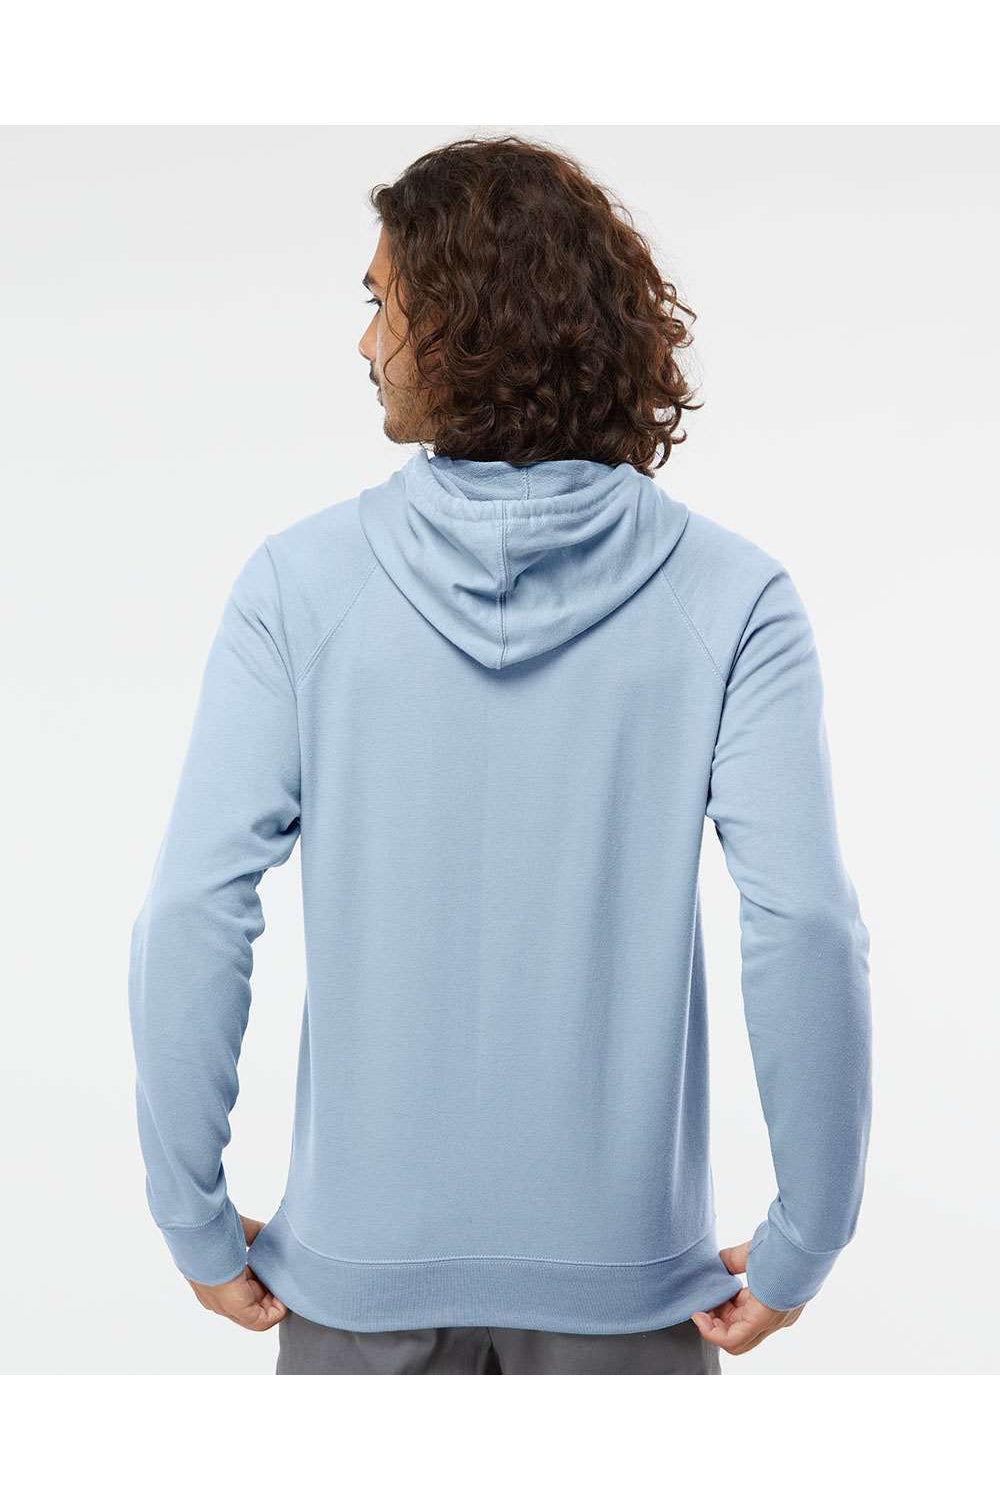 Independent Trading Co. SS1000 Mens Icon Loopback Terry Hooded Sweatshirt Hoodie Misty Blue Model Back